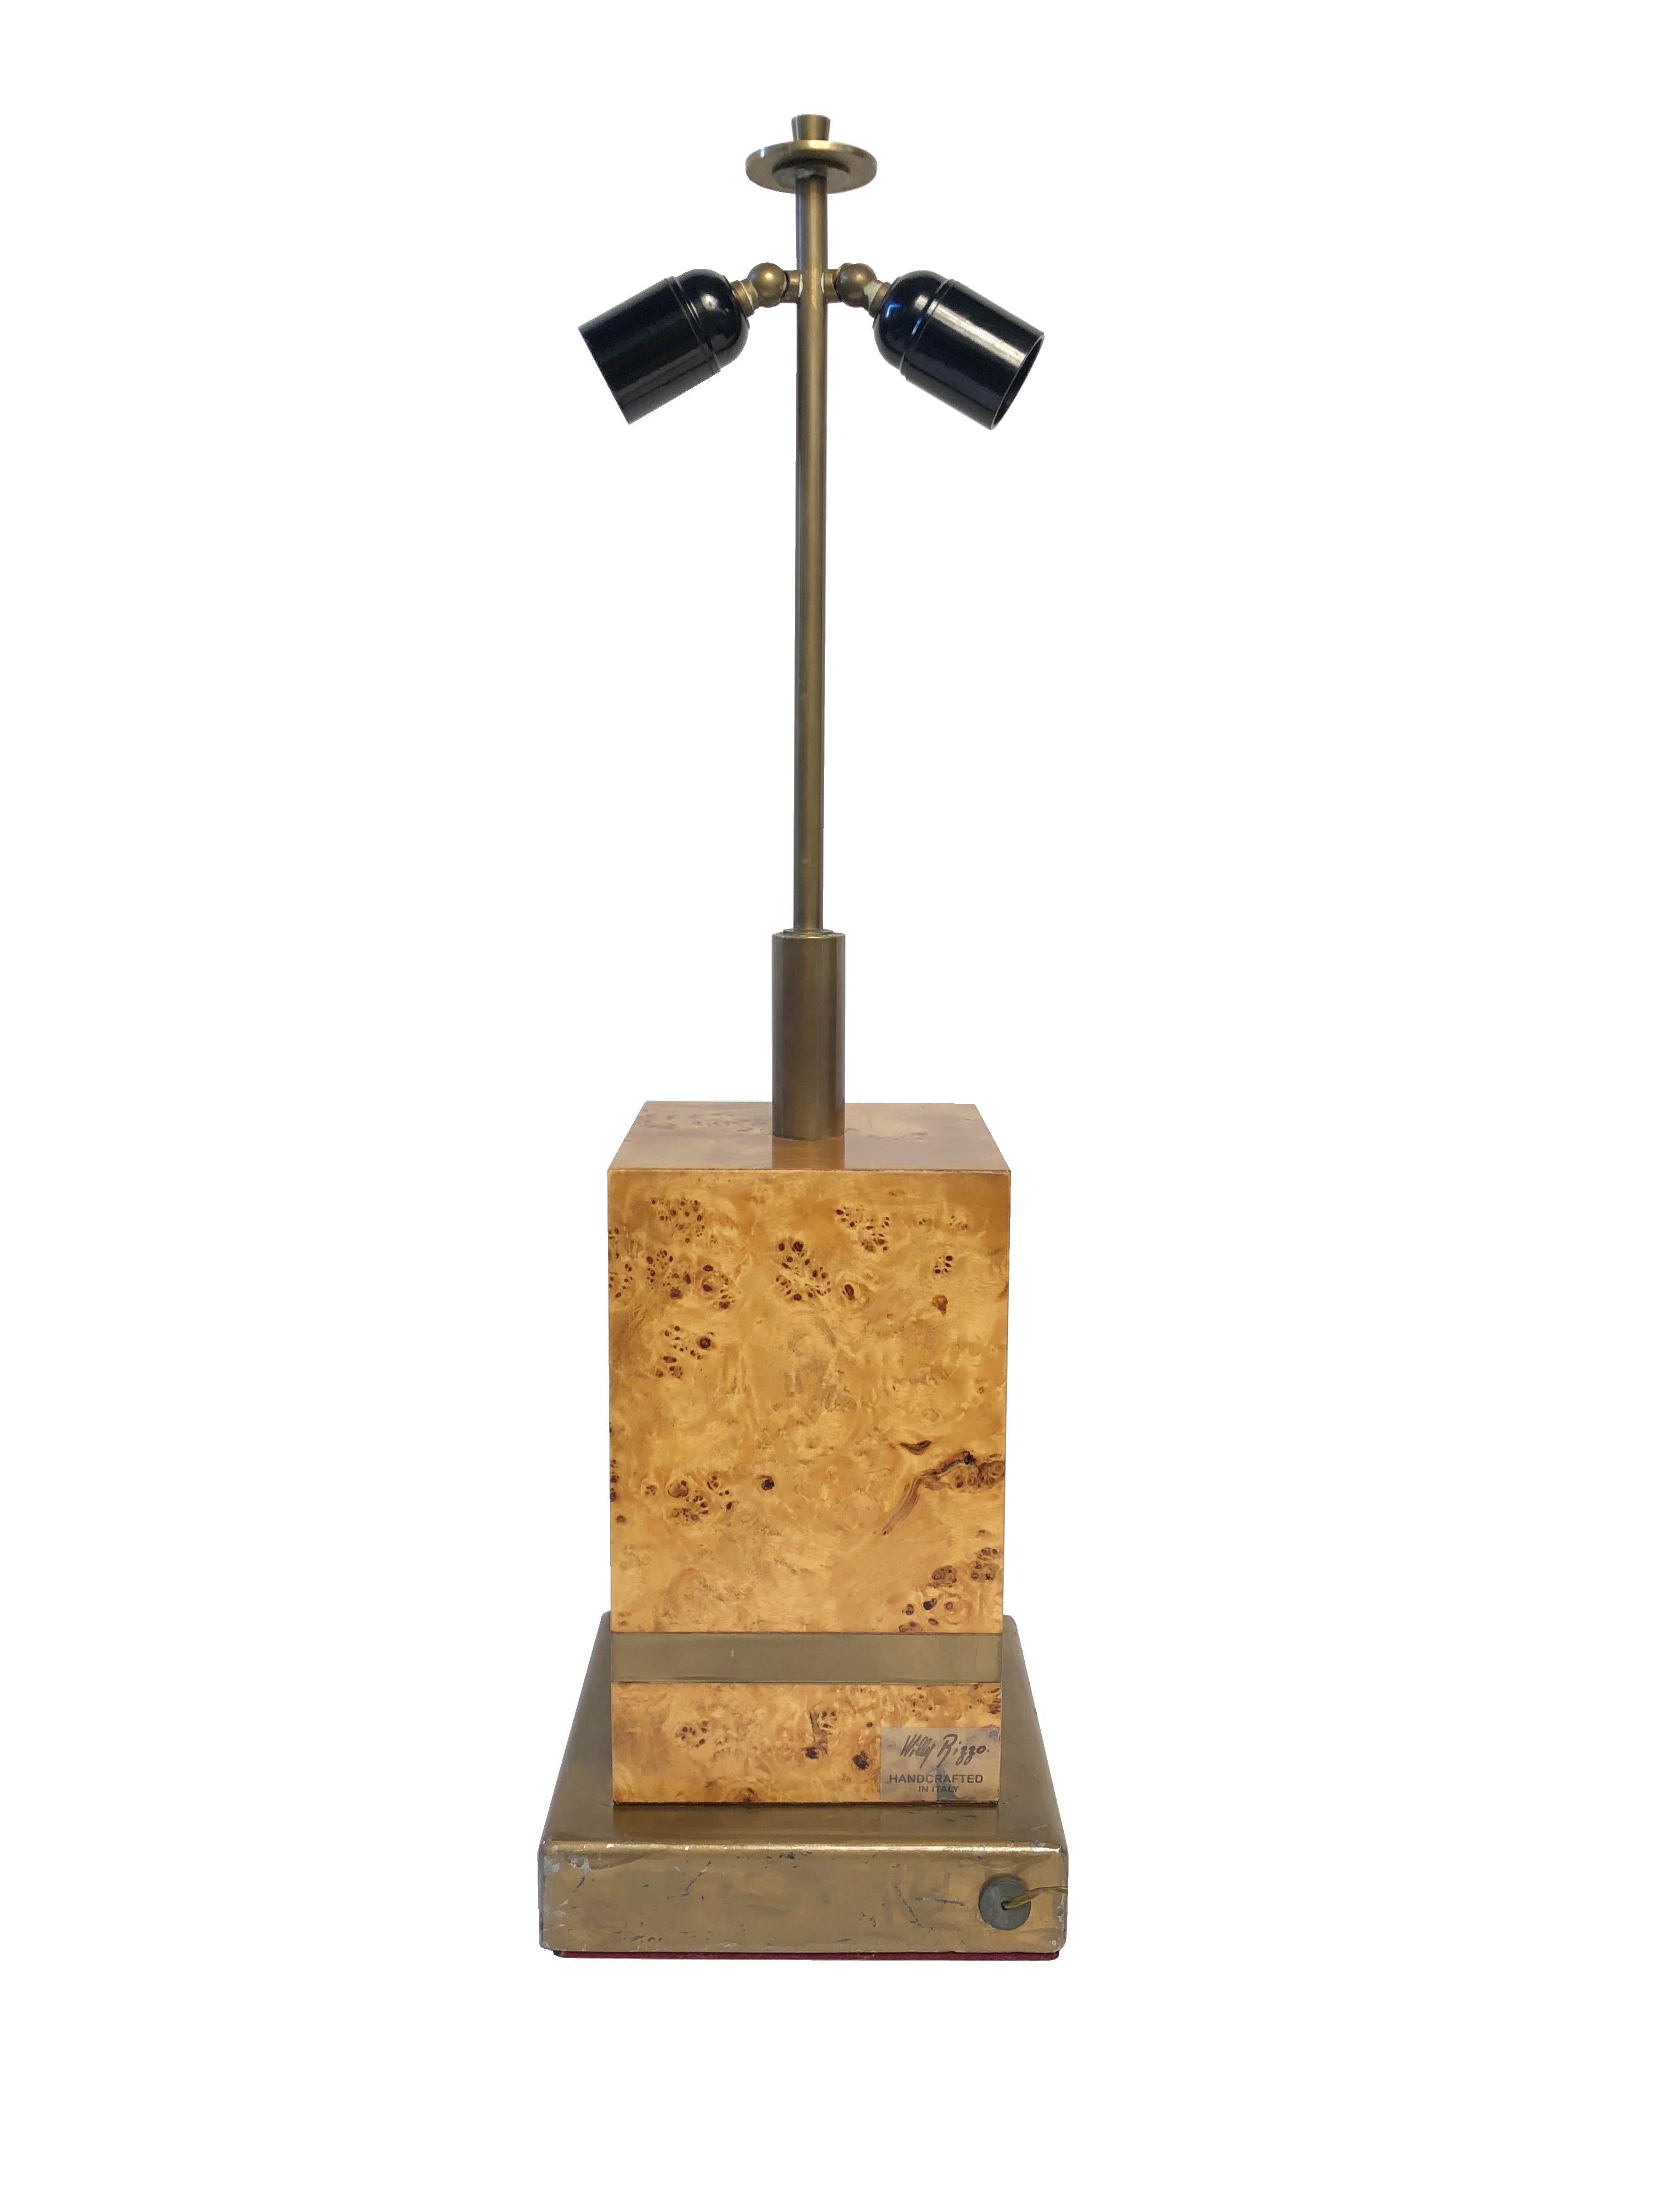 This table lamp is made of burl wood and brass by the Italian Willy Rizzo, as the label on the side shows.
The two lights are adjustable.